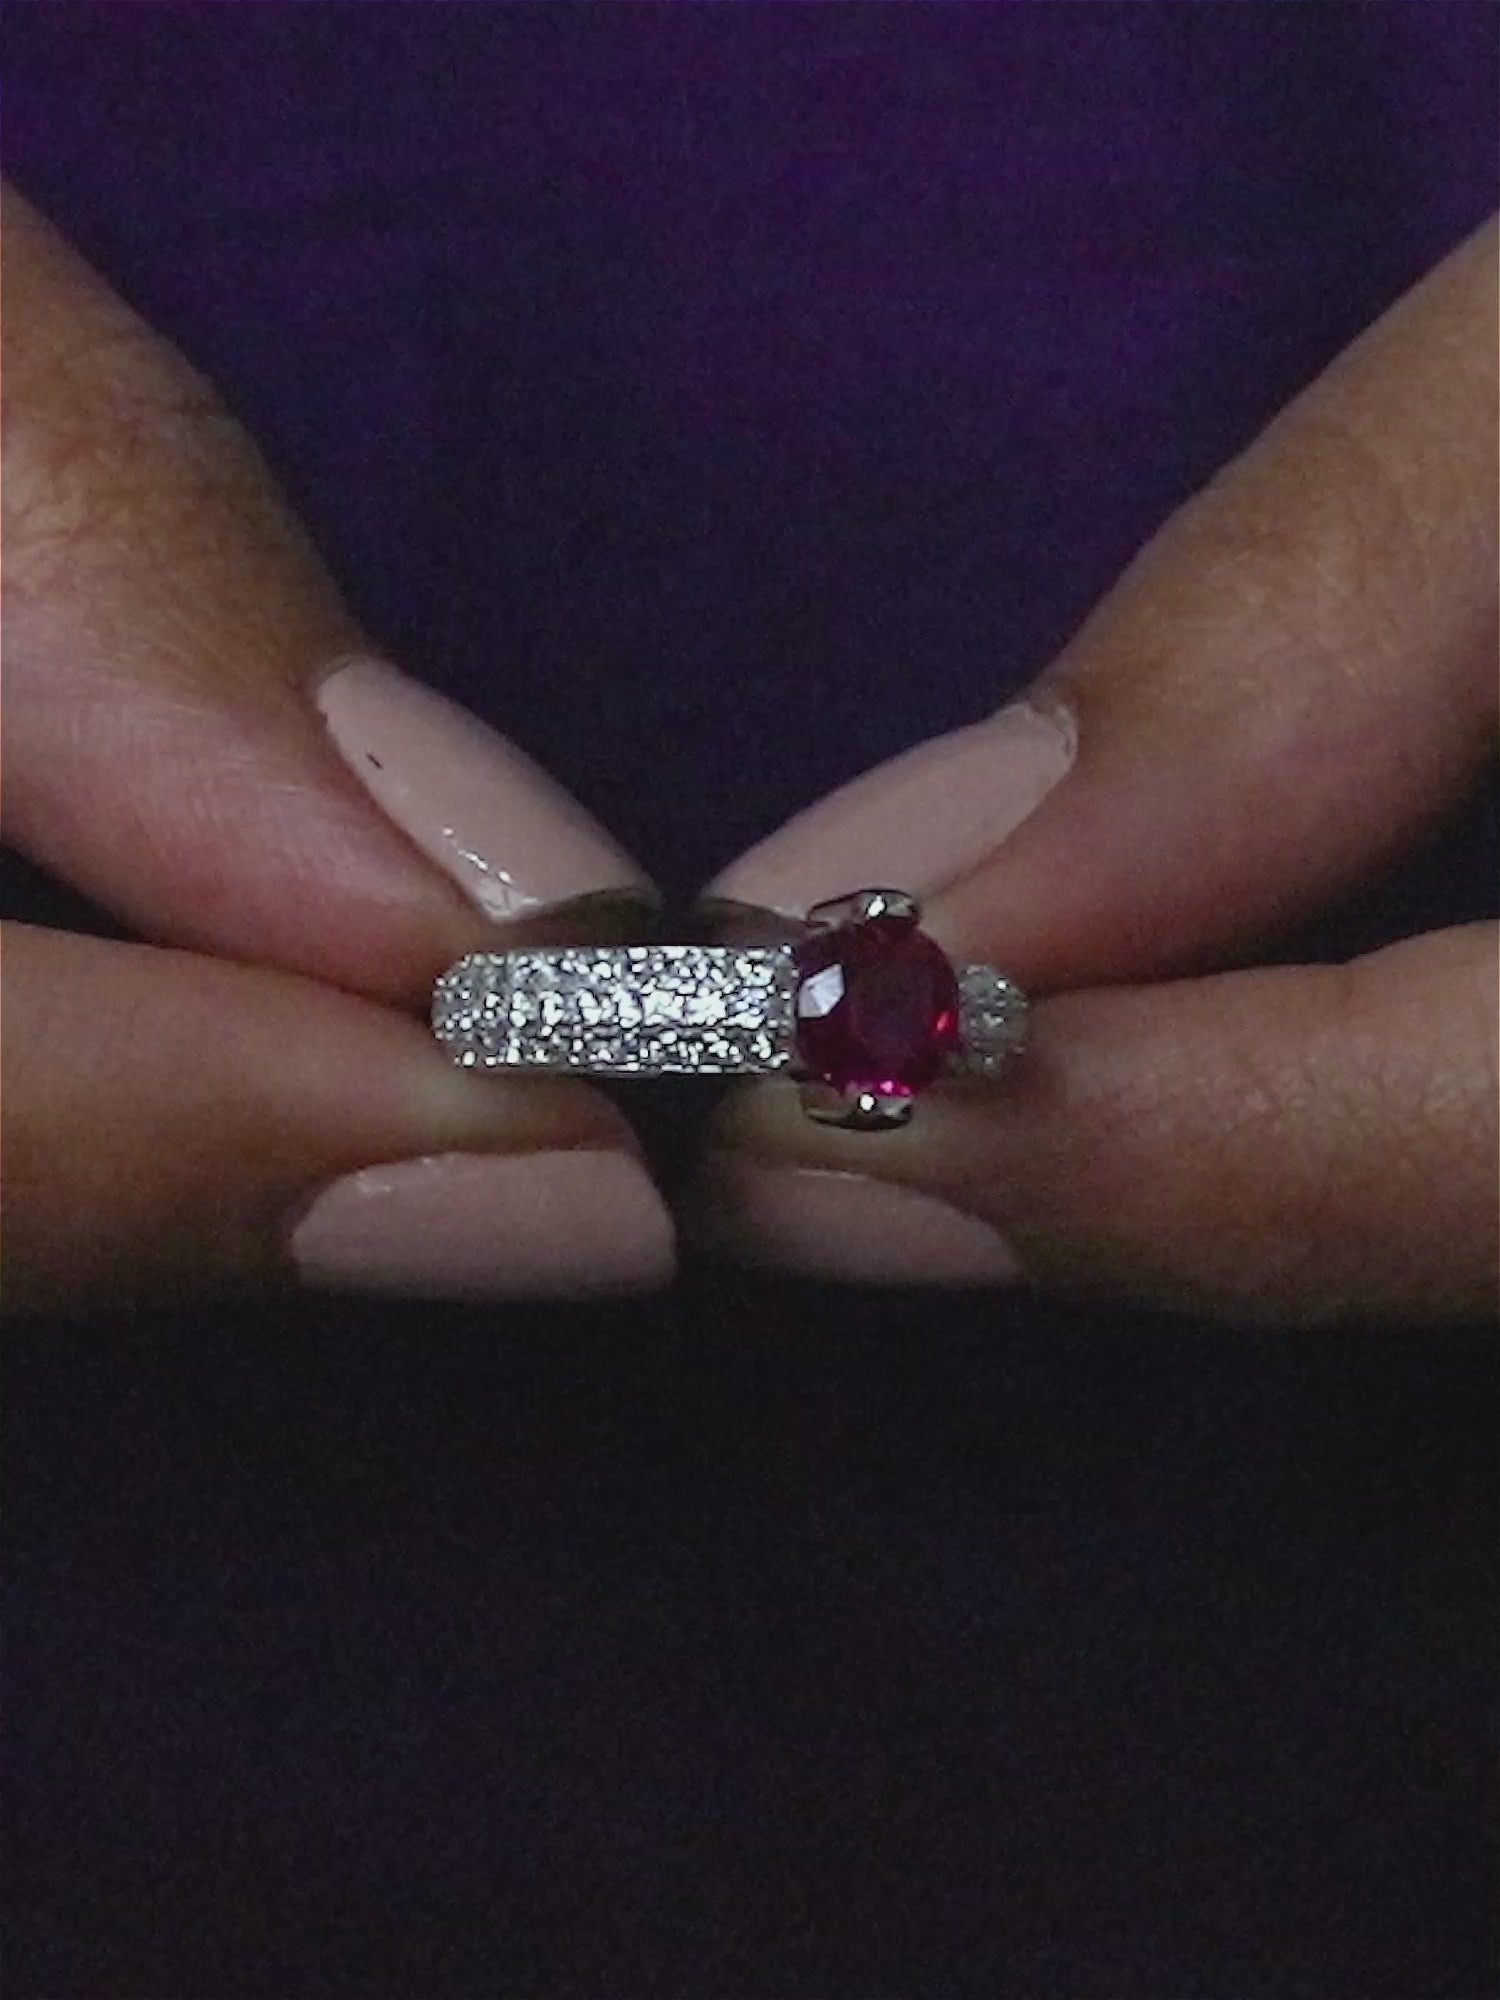 Solitaire Ornate Ruby Silver Ring For Women